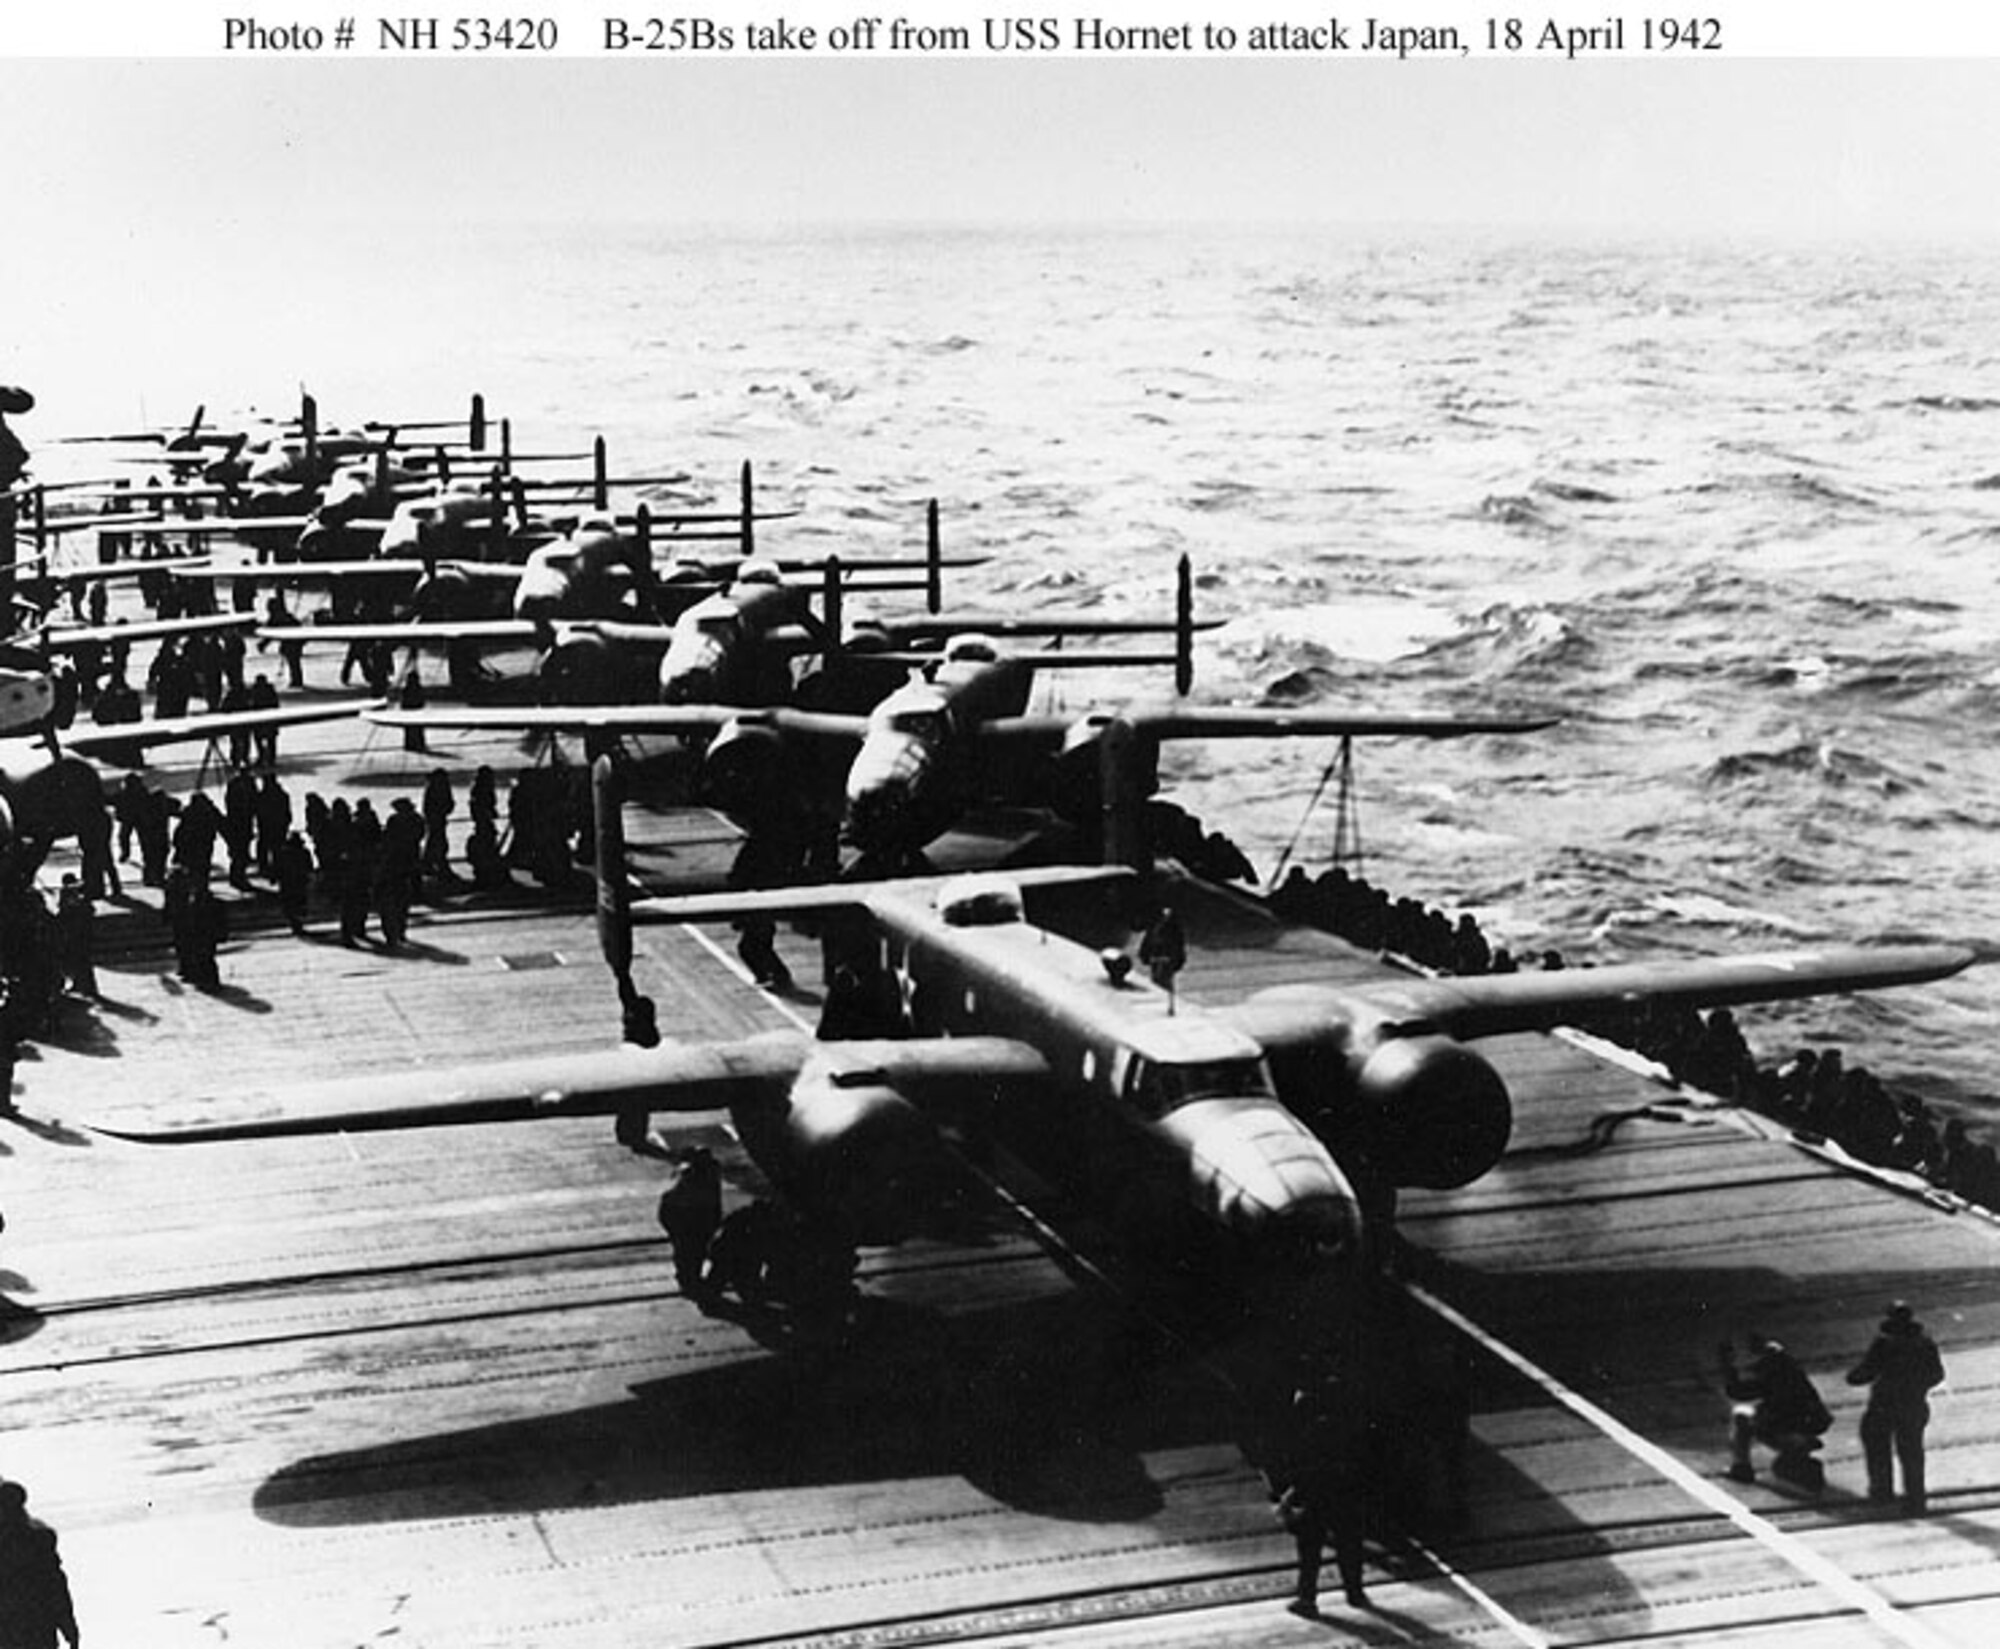 A B-25B bomber lines up for takeoff from USS Hornet (CV-8), on the morning of April 18, 1942. Note white lines painted on the flight deck, below the plane's nose and port side wheels, to guide the pilot during his takeoff run. This is the third or fourth plane to be launched. (U.S. Naval Historical Center Photograph)